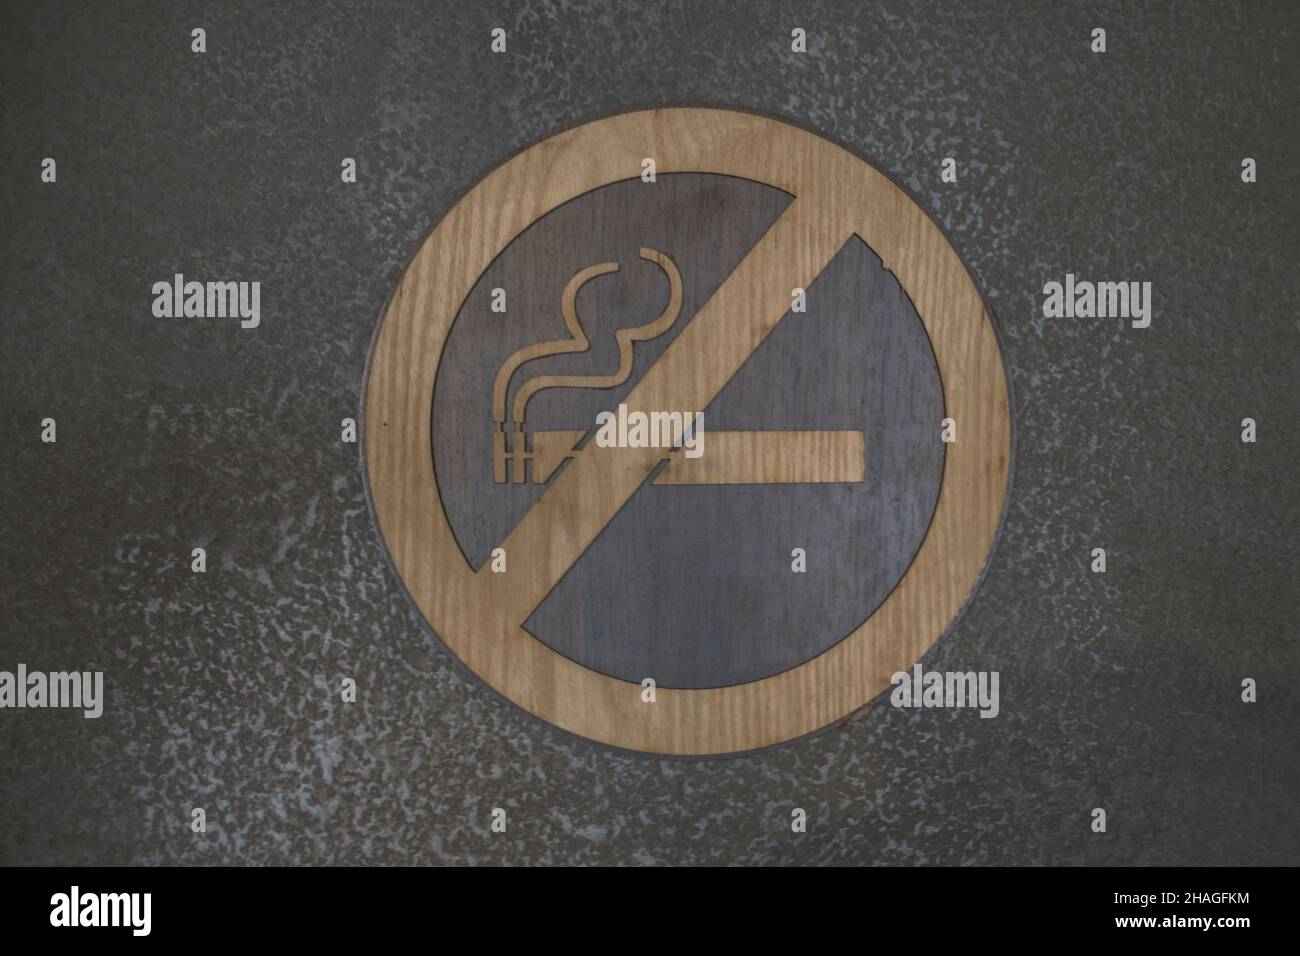 No smoking cigarette sign in on the wall in cafe. wooden sign on the dark grey wall. Prohibited signs to be placed inside buildings Stock Photo